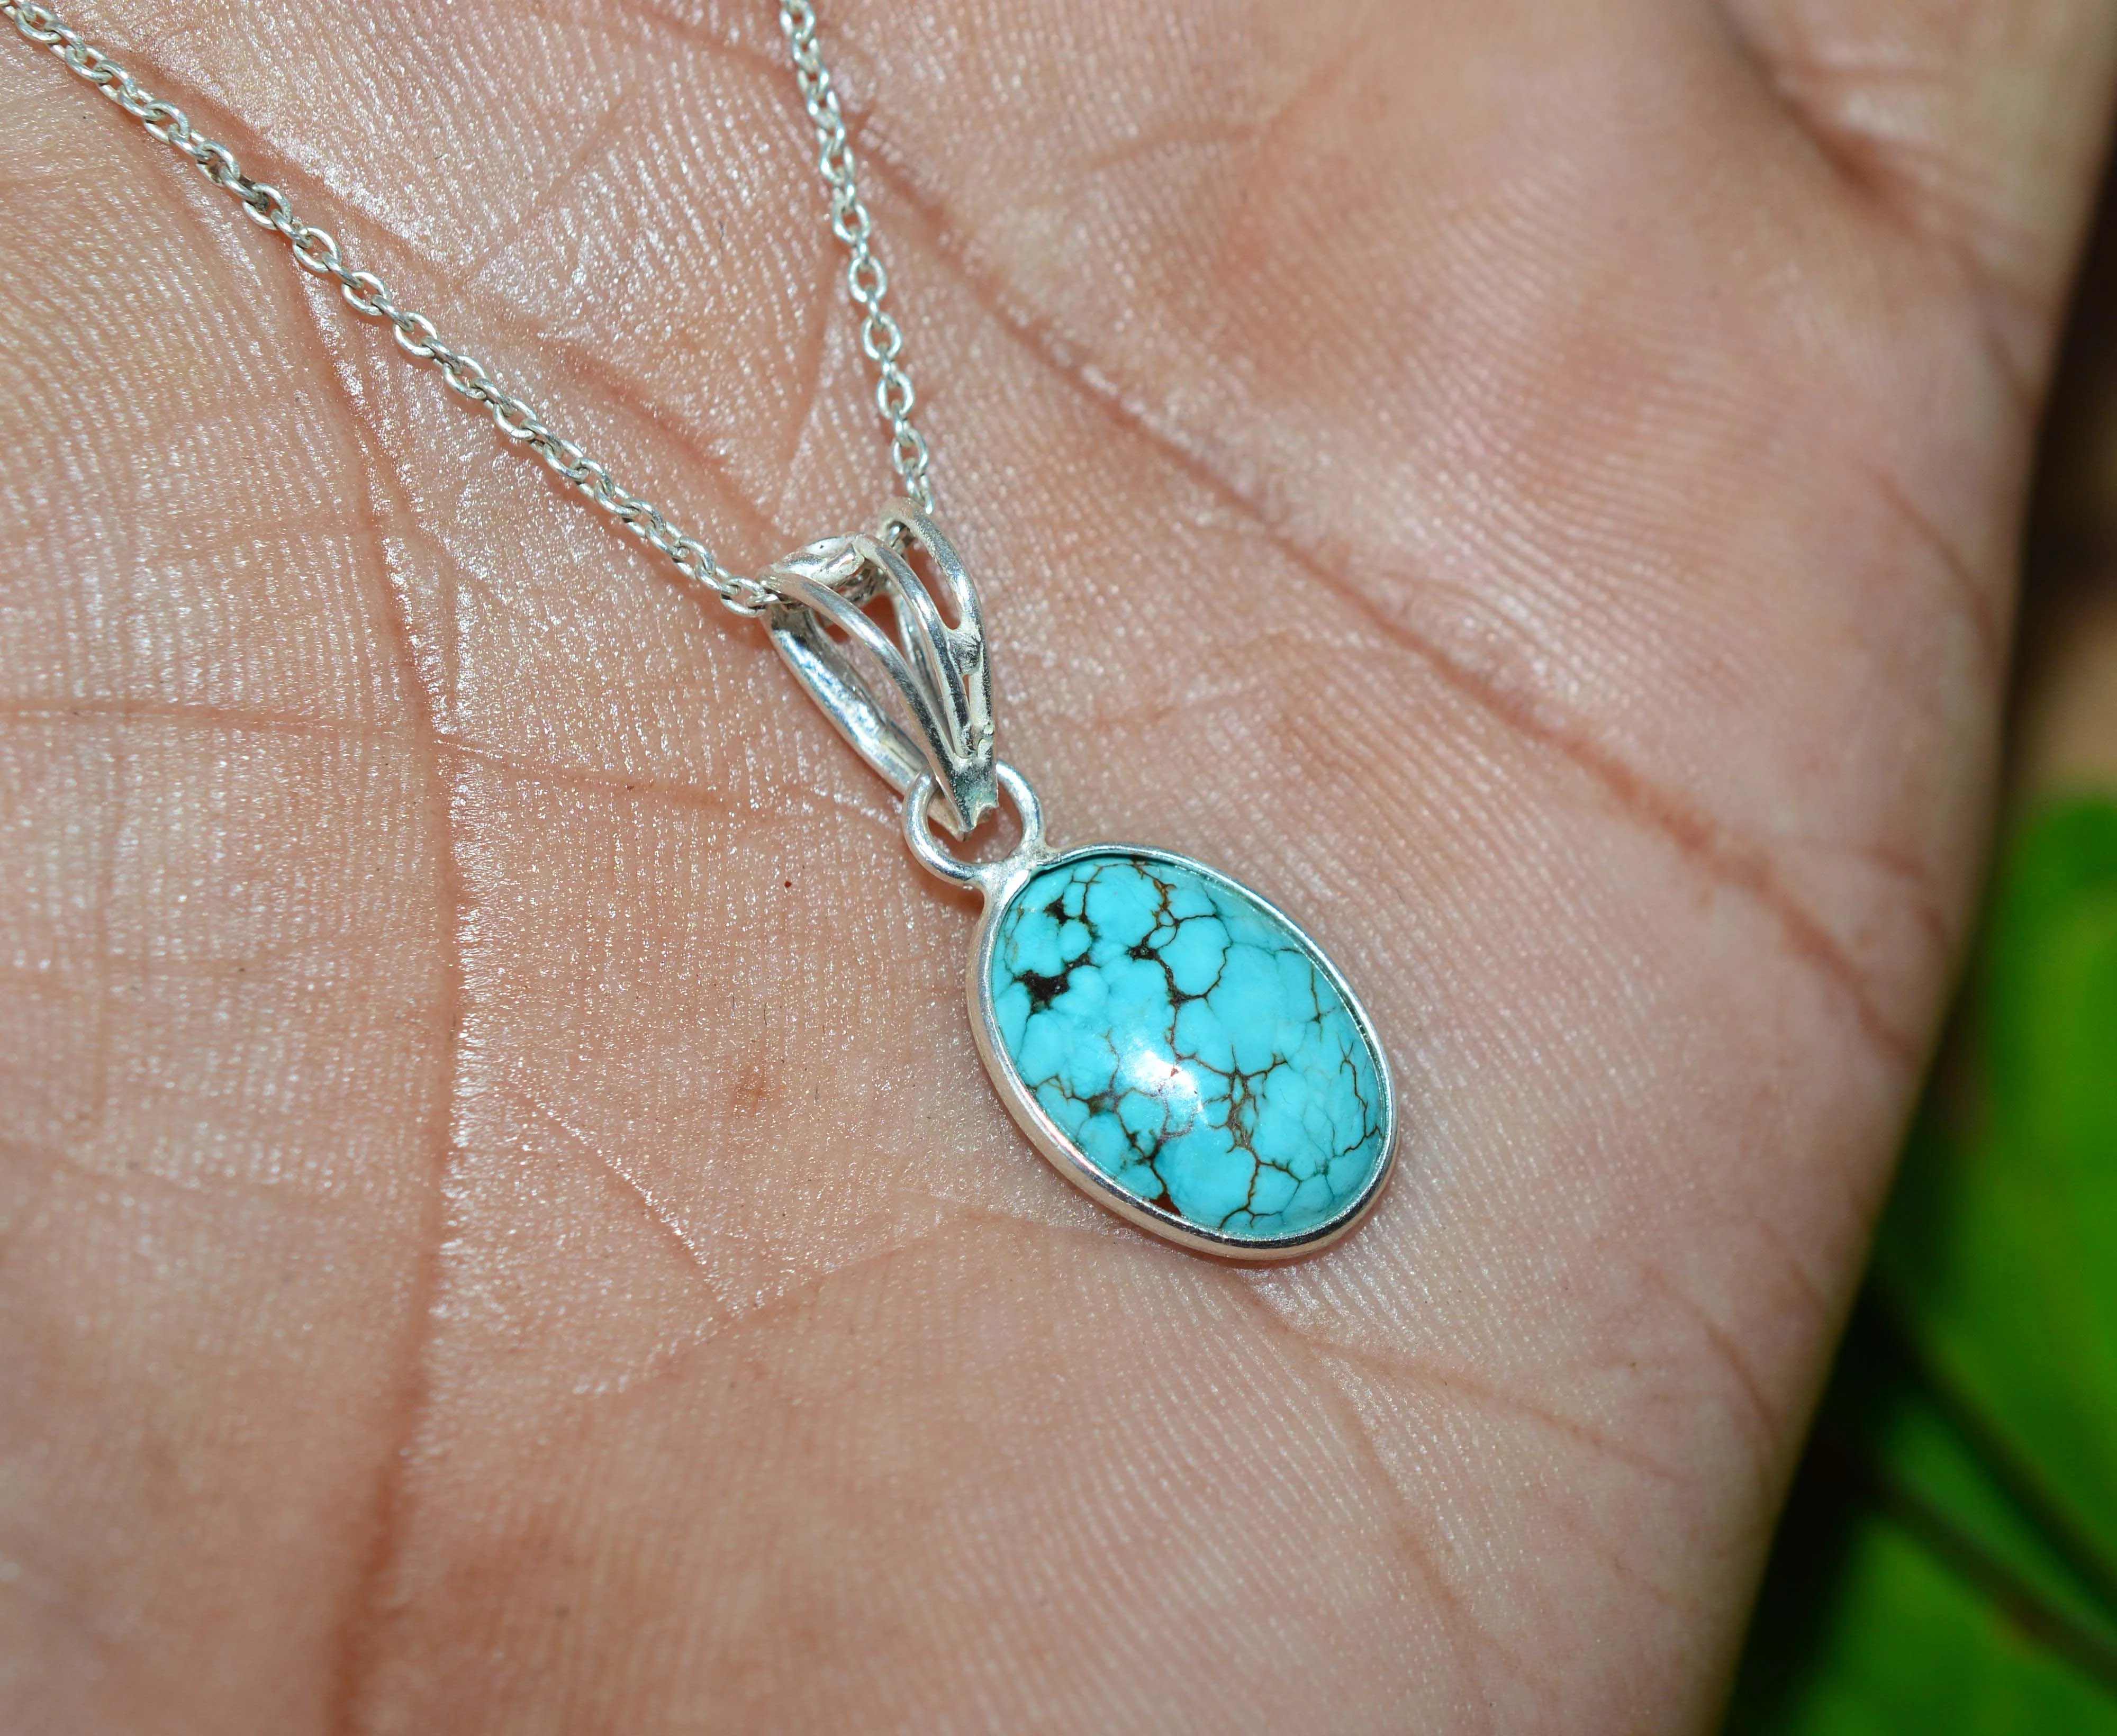 Amazing designer blue turquoise chain pendant solid sterling silver handmade silver wholesale supplier silver necklace